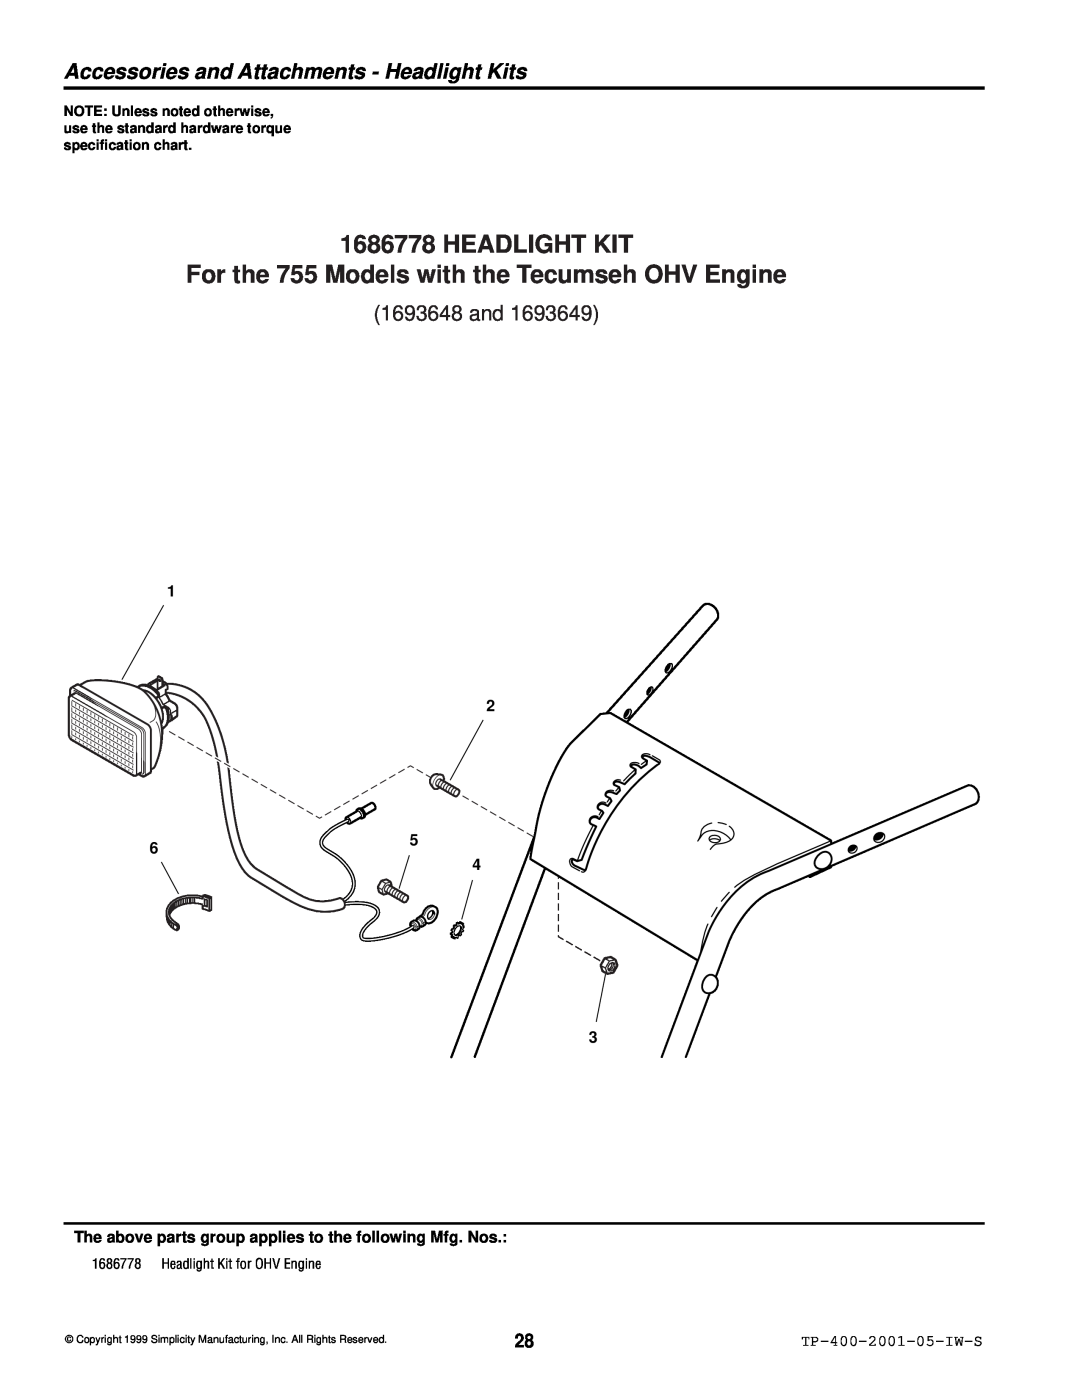 Simplicity 1693161 manual HEADLIGHT KIT For the 755 Models with the Tecumseh OHV Engine, 1693648 and, TP-400-2001-05-IW-S 